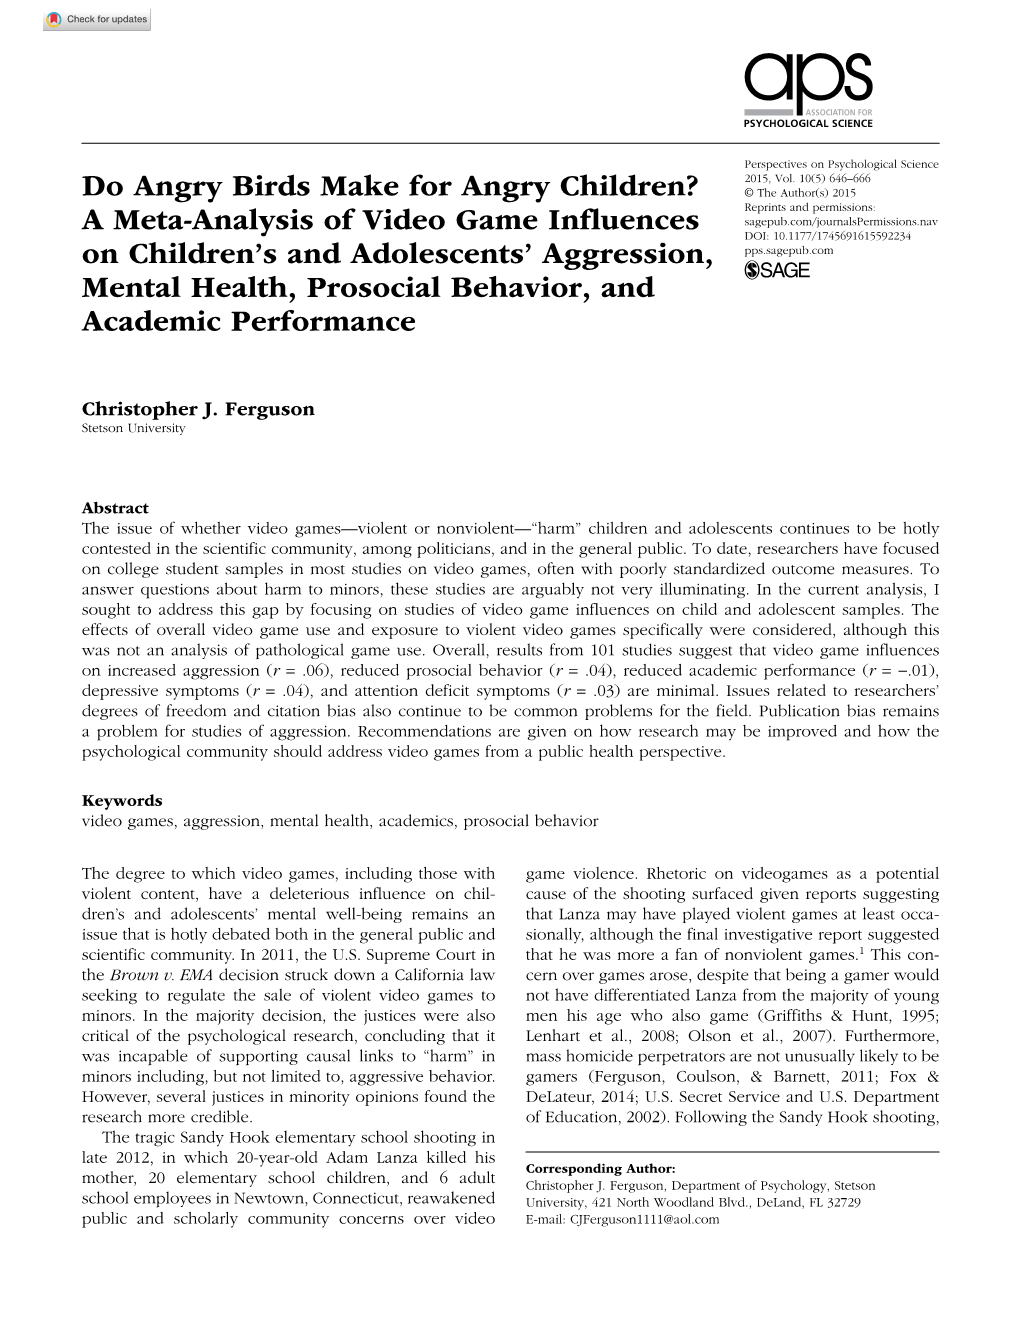 A Meta-Analysis of Video Game Influences on Children's And